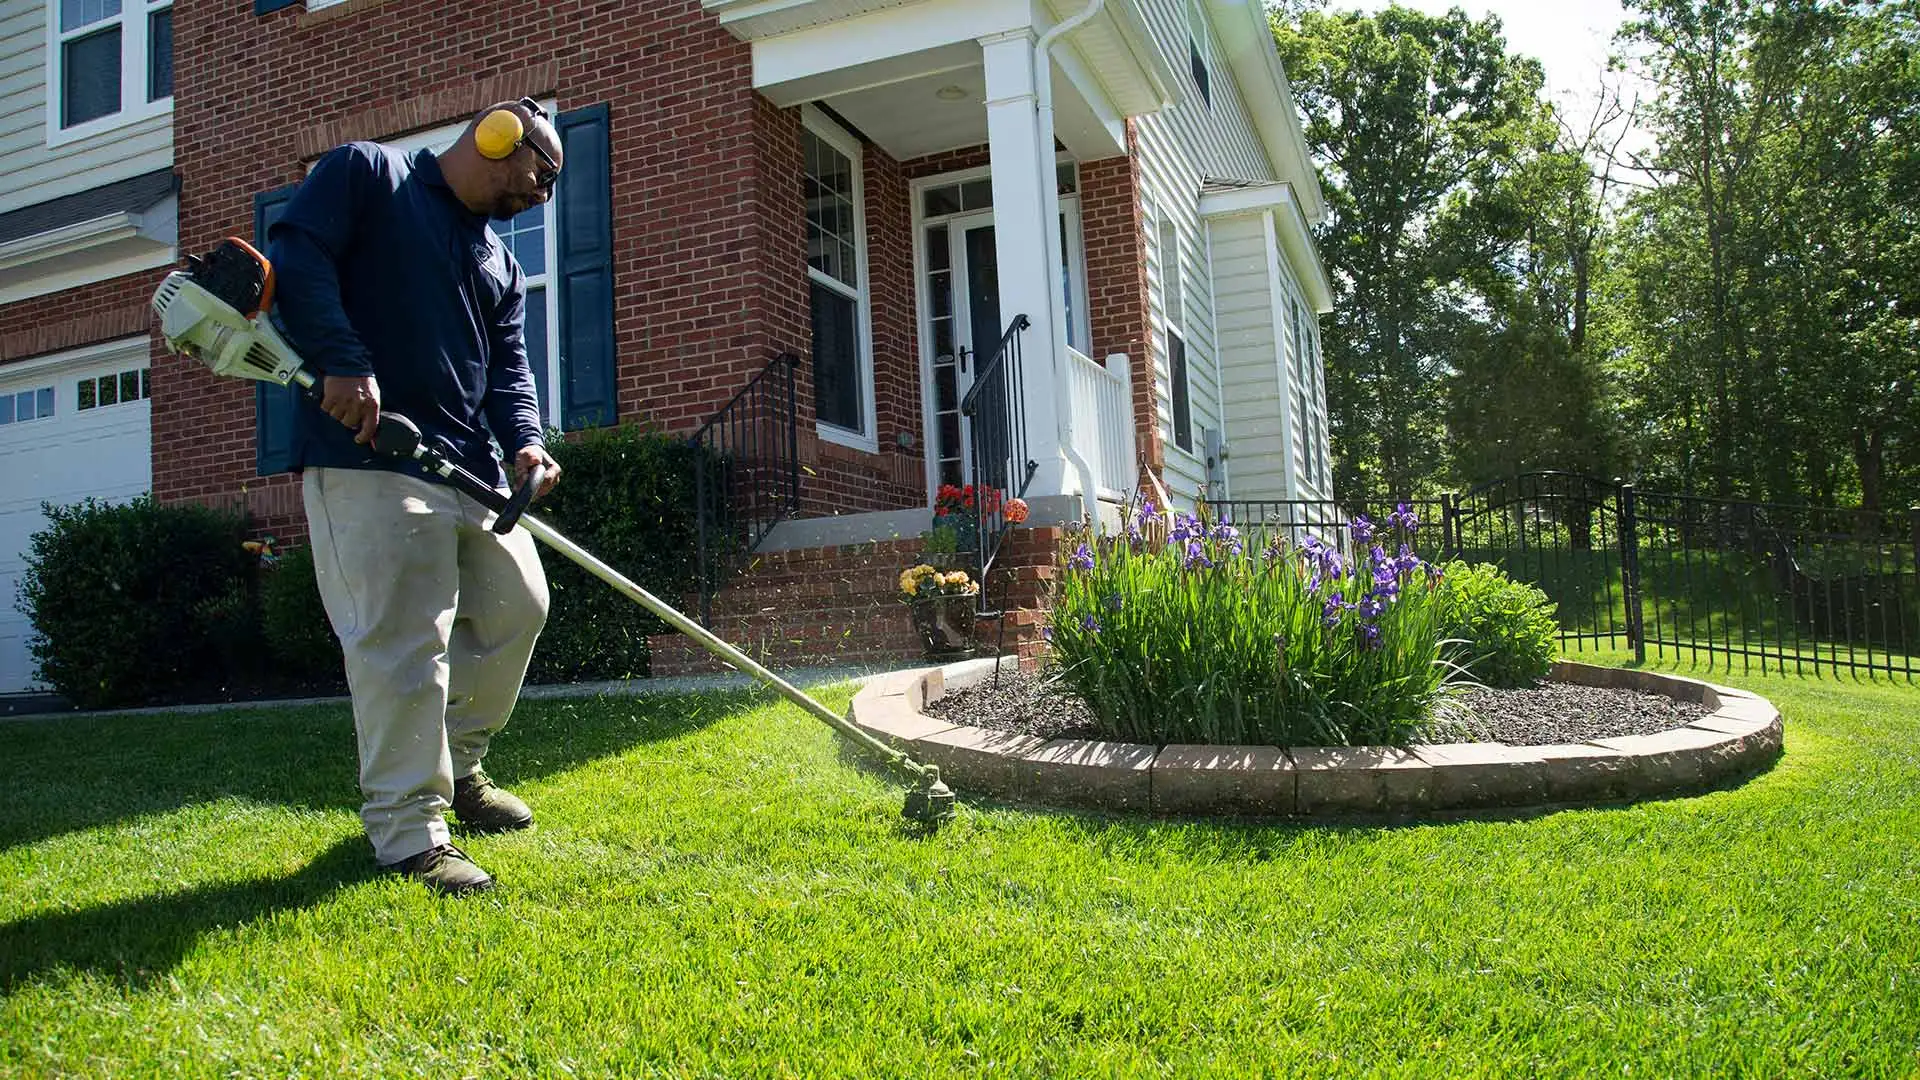 A man is weedwhacking a lawn around the edge of a landscape bed.